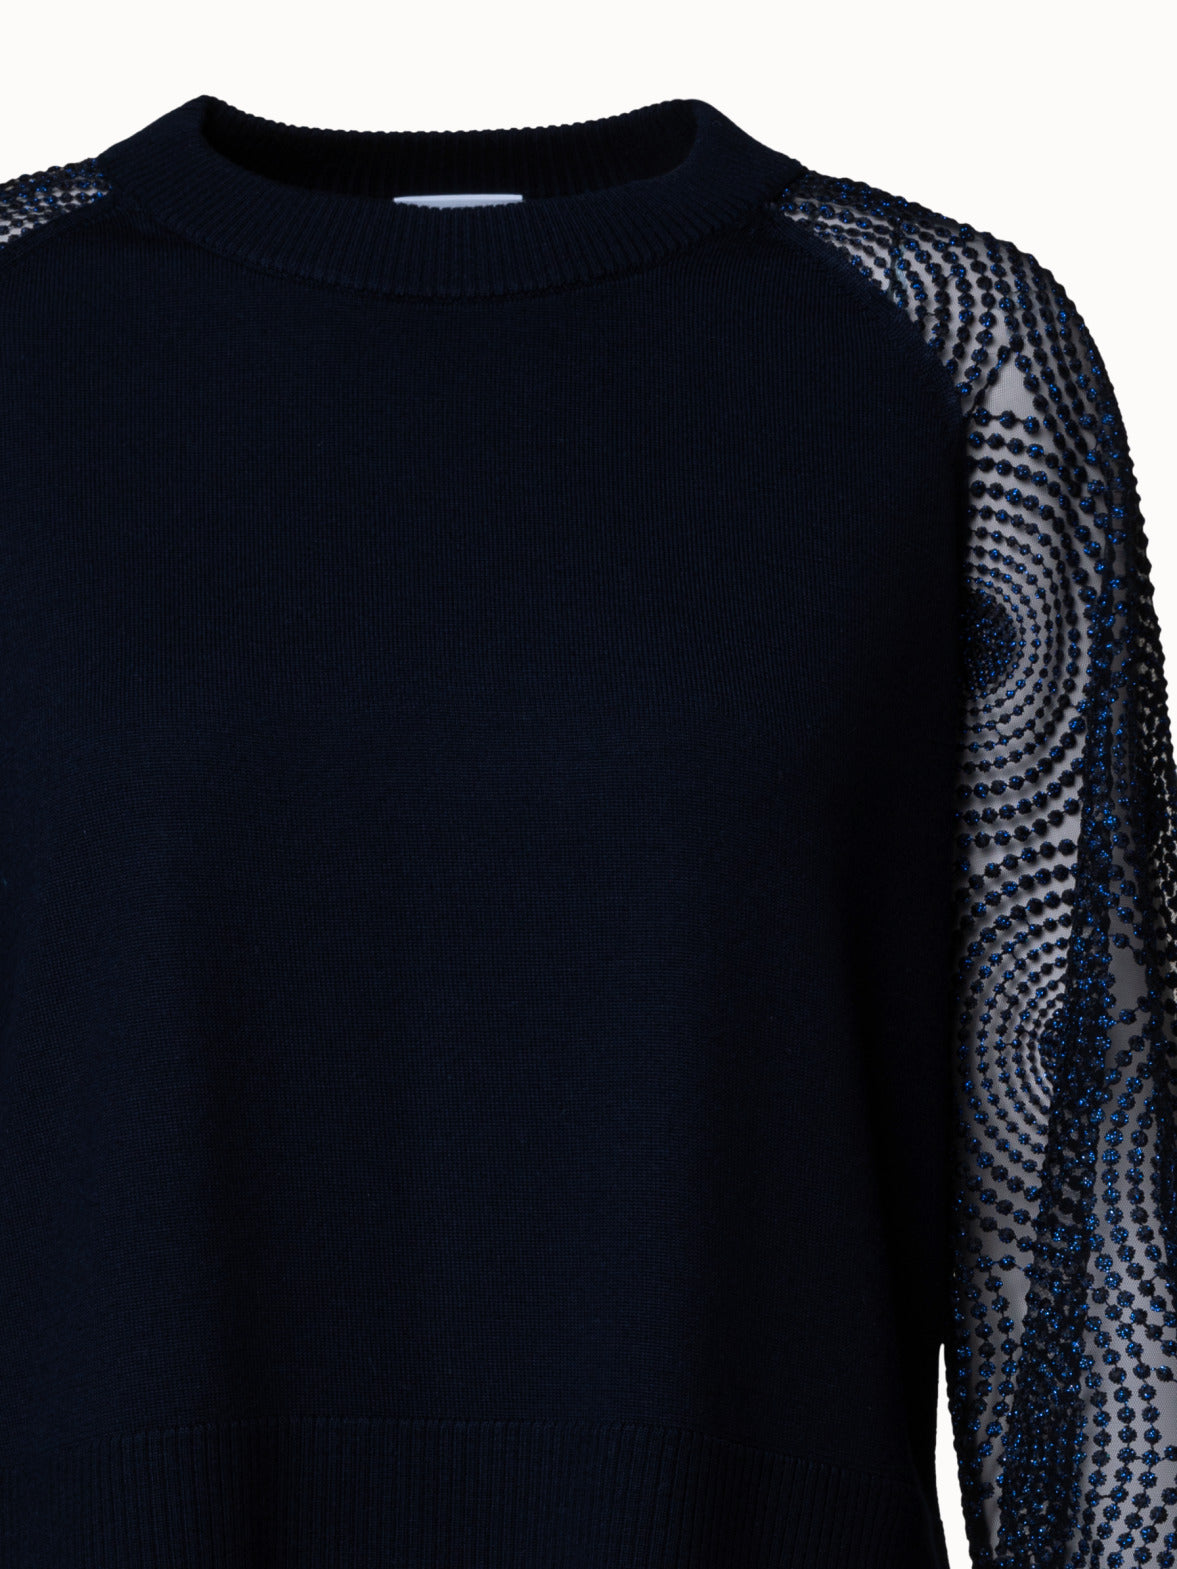 Wool Knit Pullover with Metallic 3D Dot Embroidery Sleeves